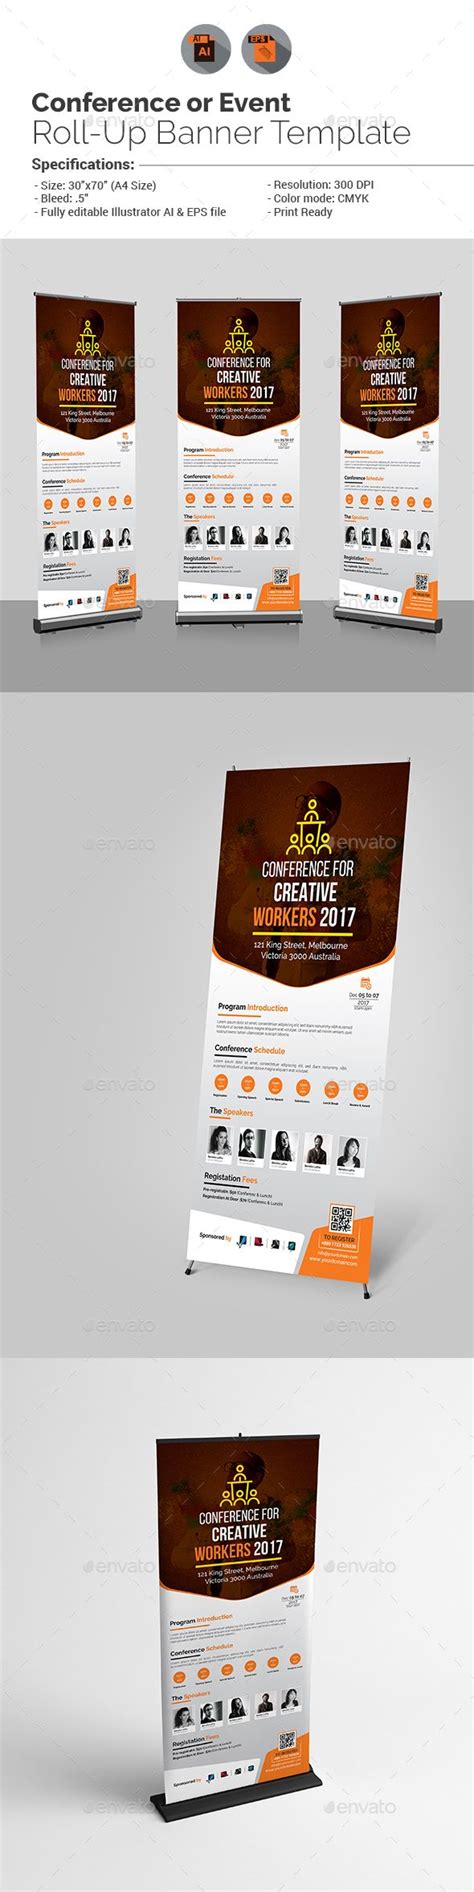 Conferenceevent Roll Up Banner Template Banner Template Rollup